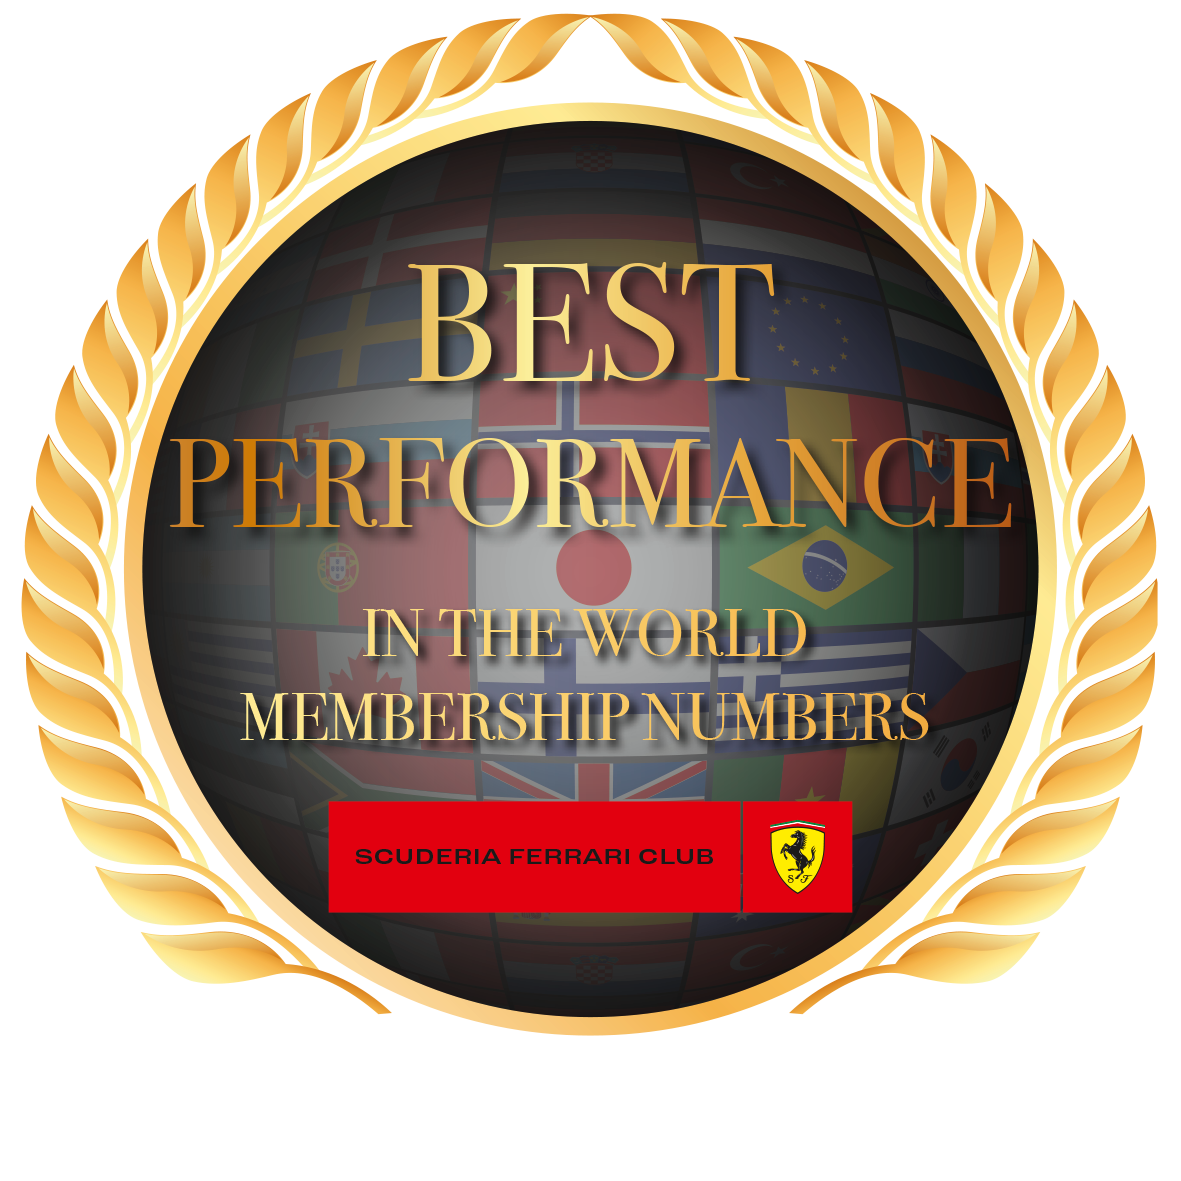 BEST PERFOMANCE in the world membership numbers